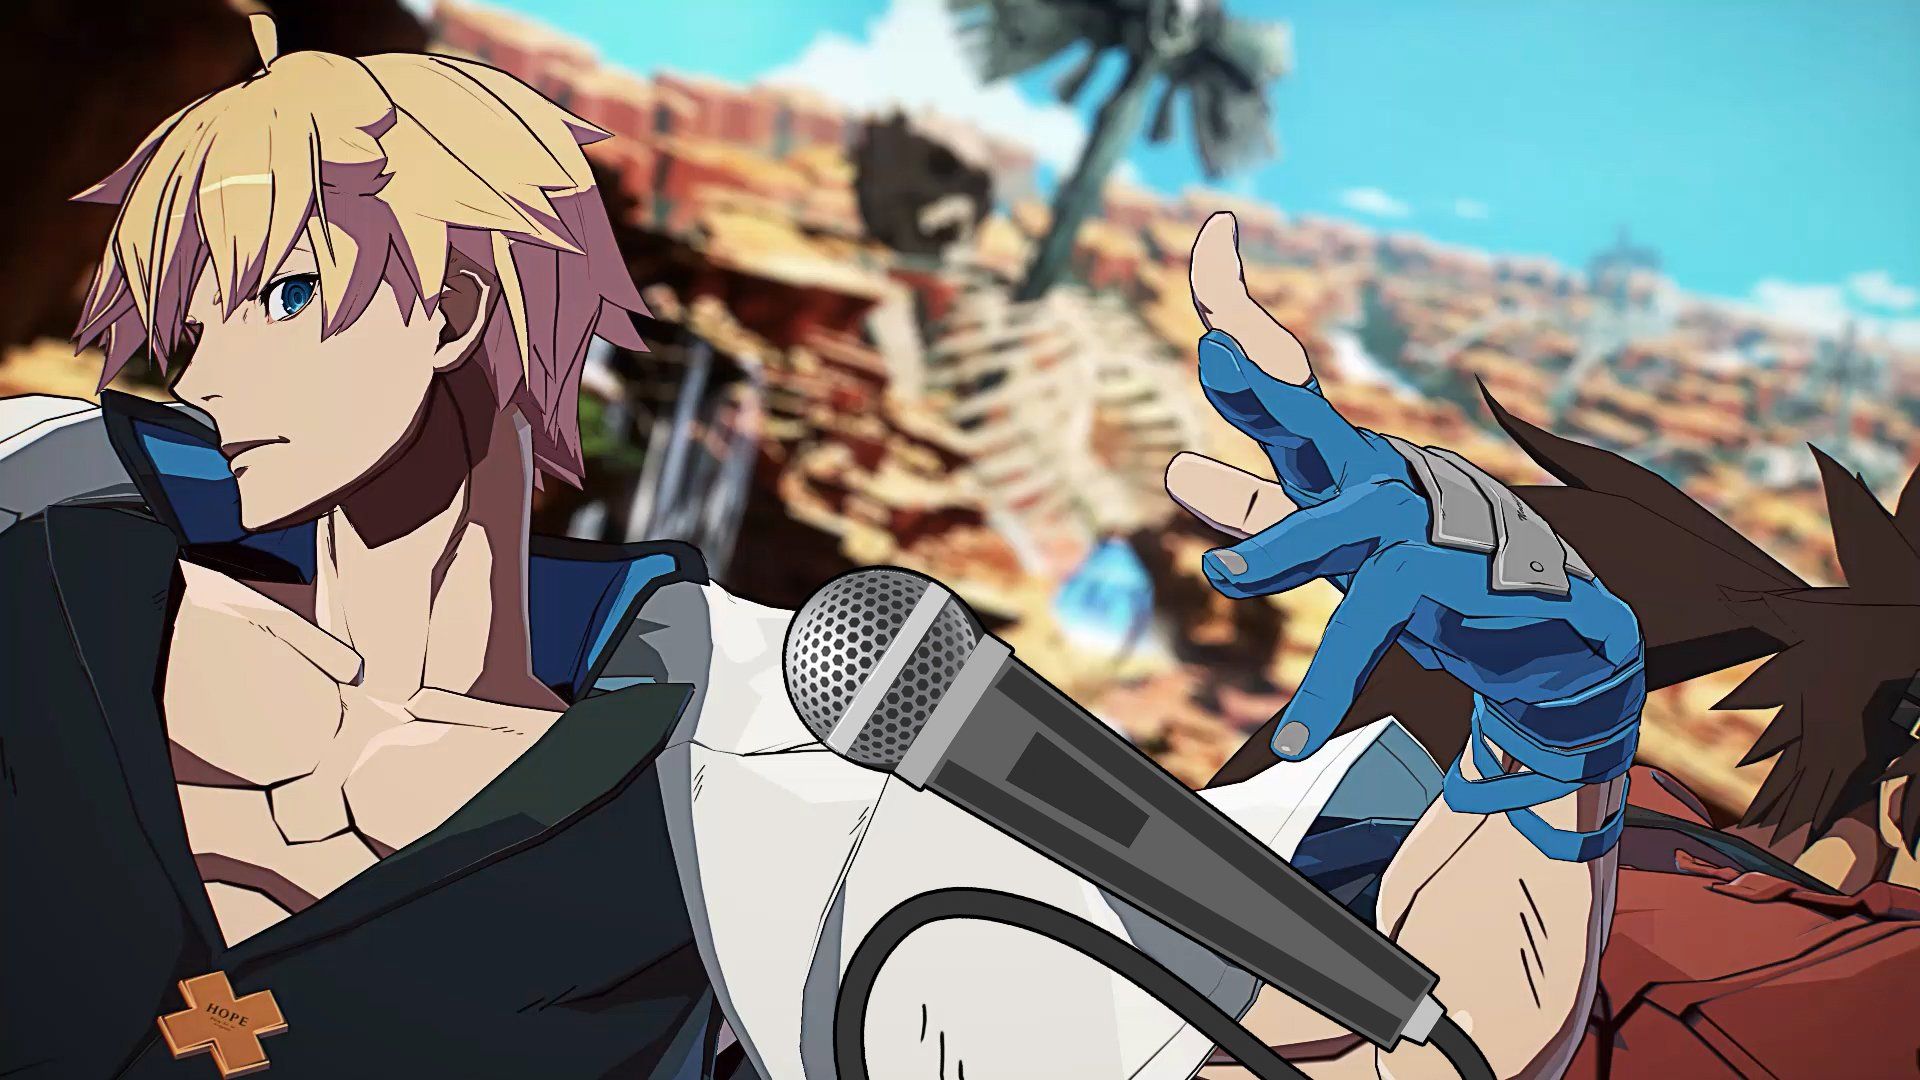 Guilty Gear Strive Will Have Rollback Netcode, Closed Beta in April